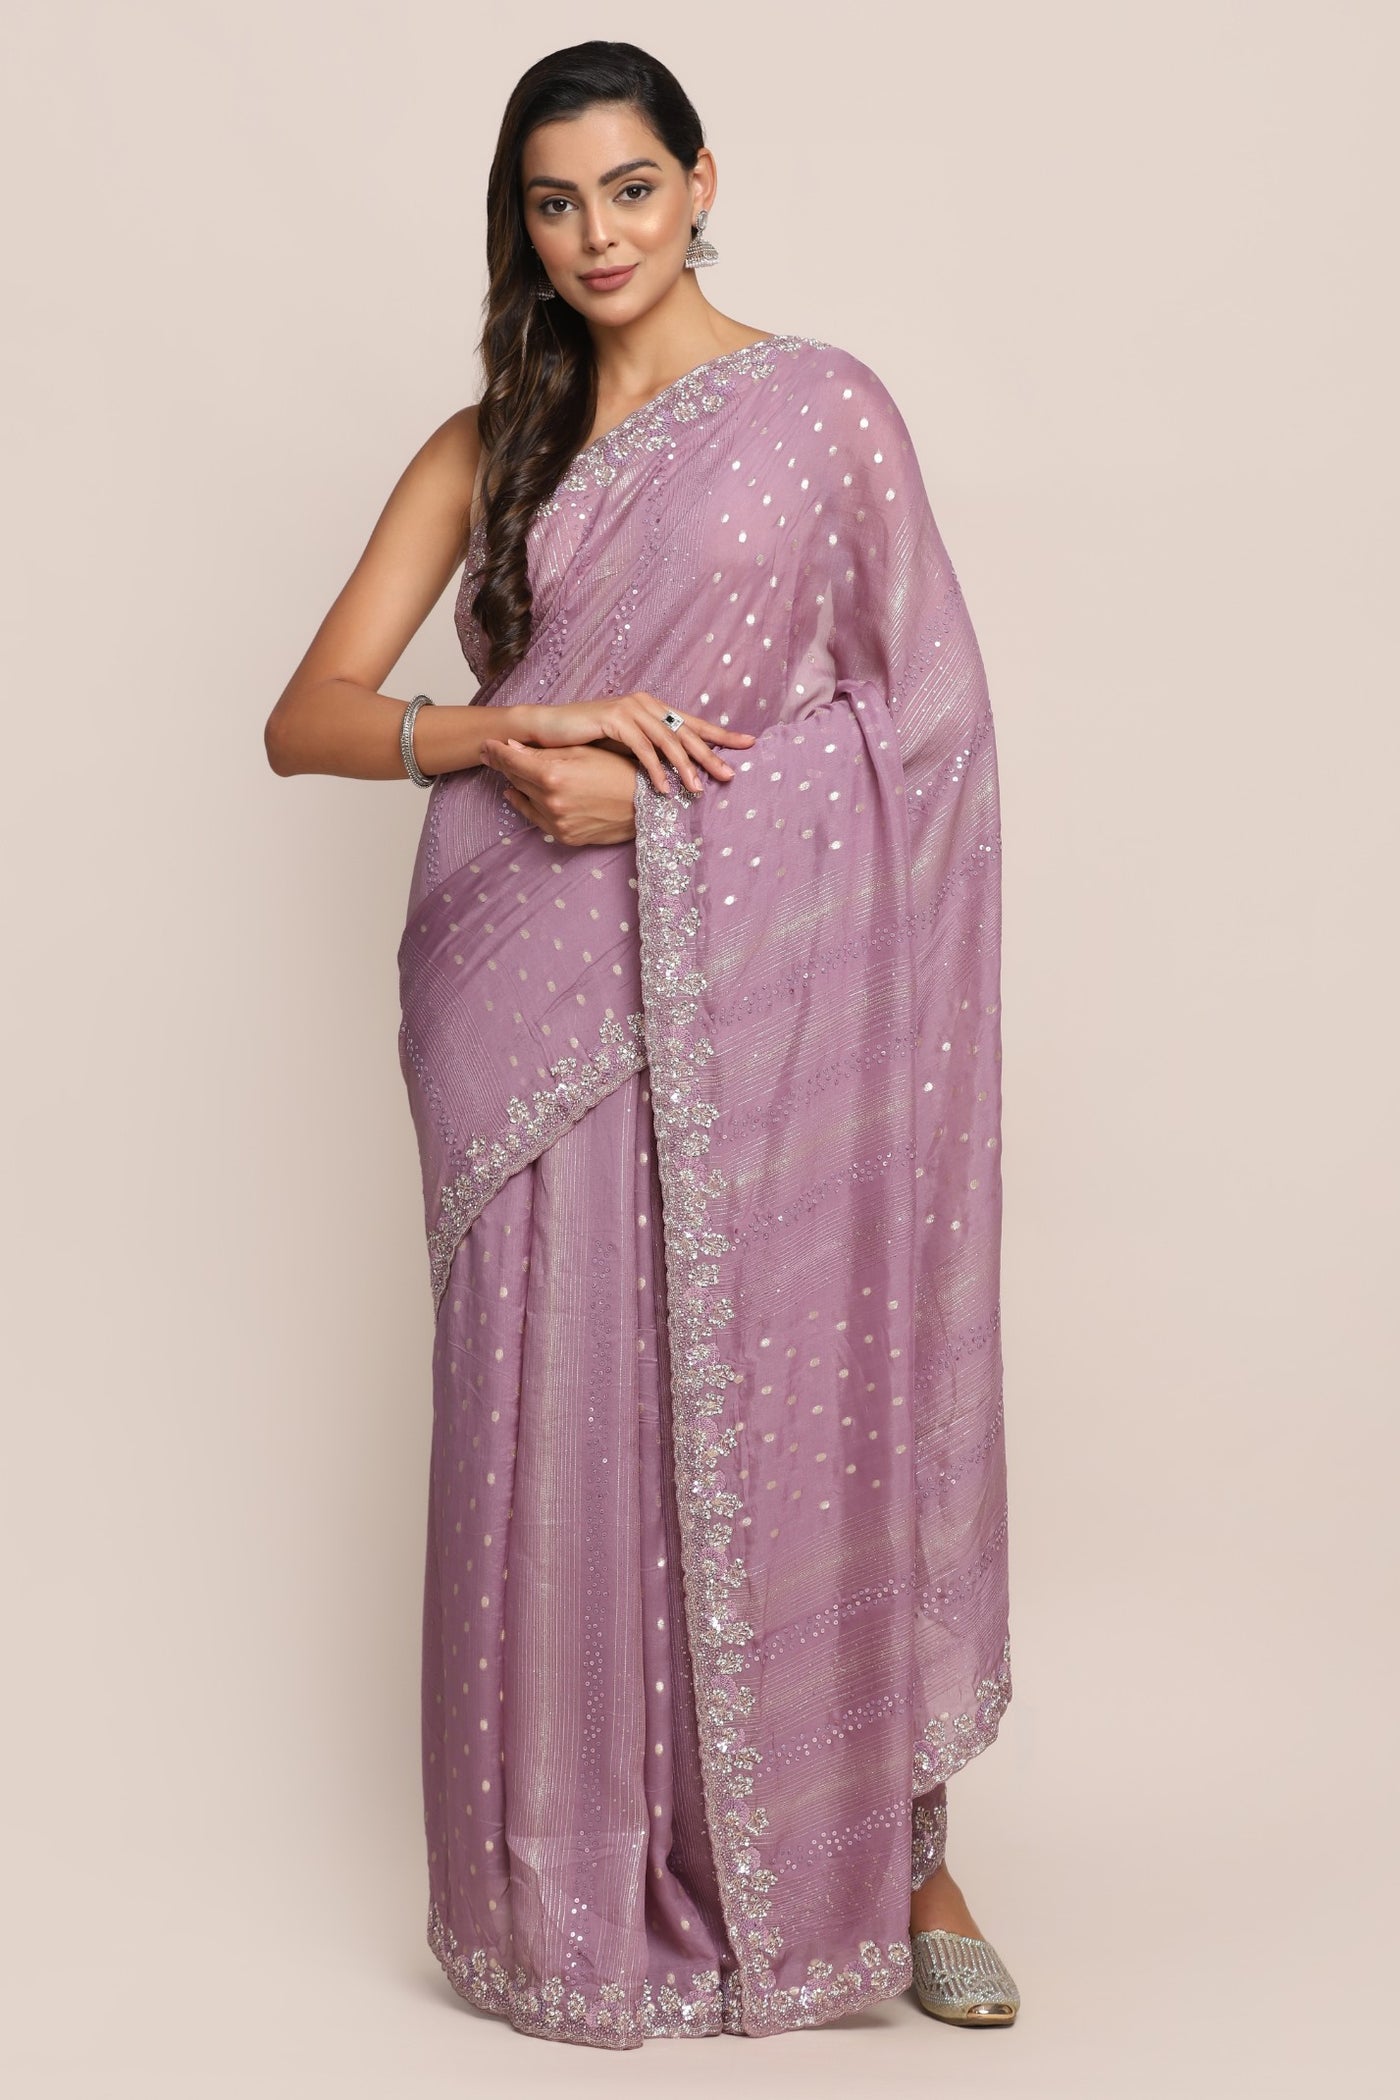 Attractive onion pink color floral motif embroidered saree